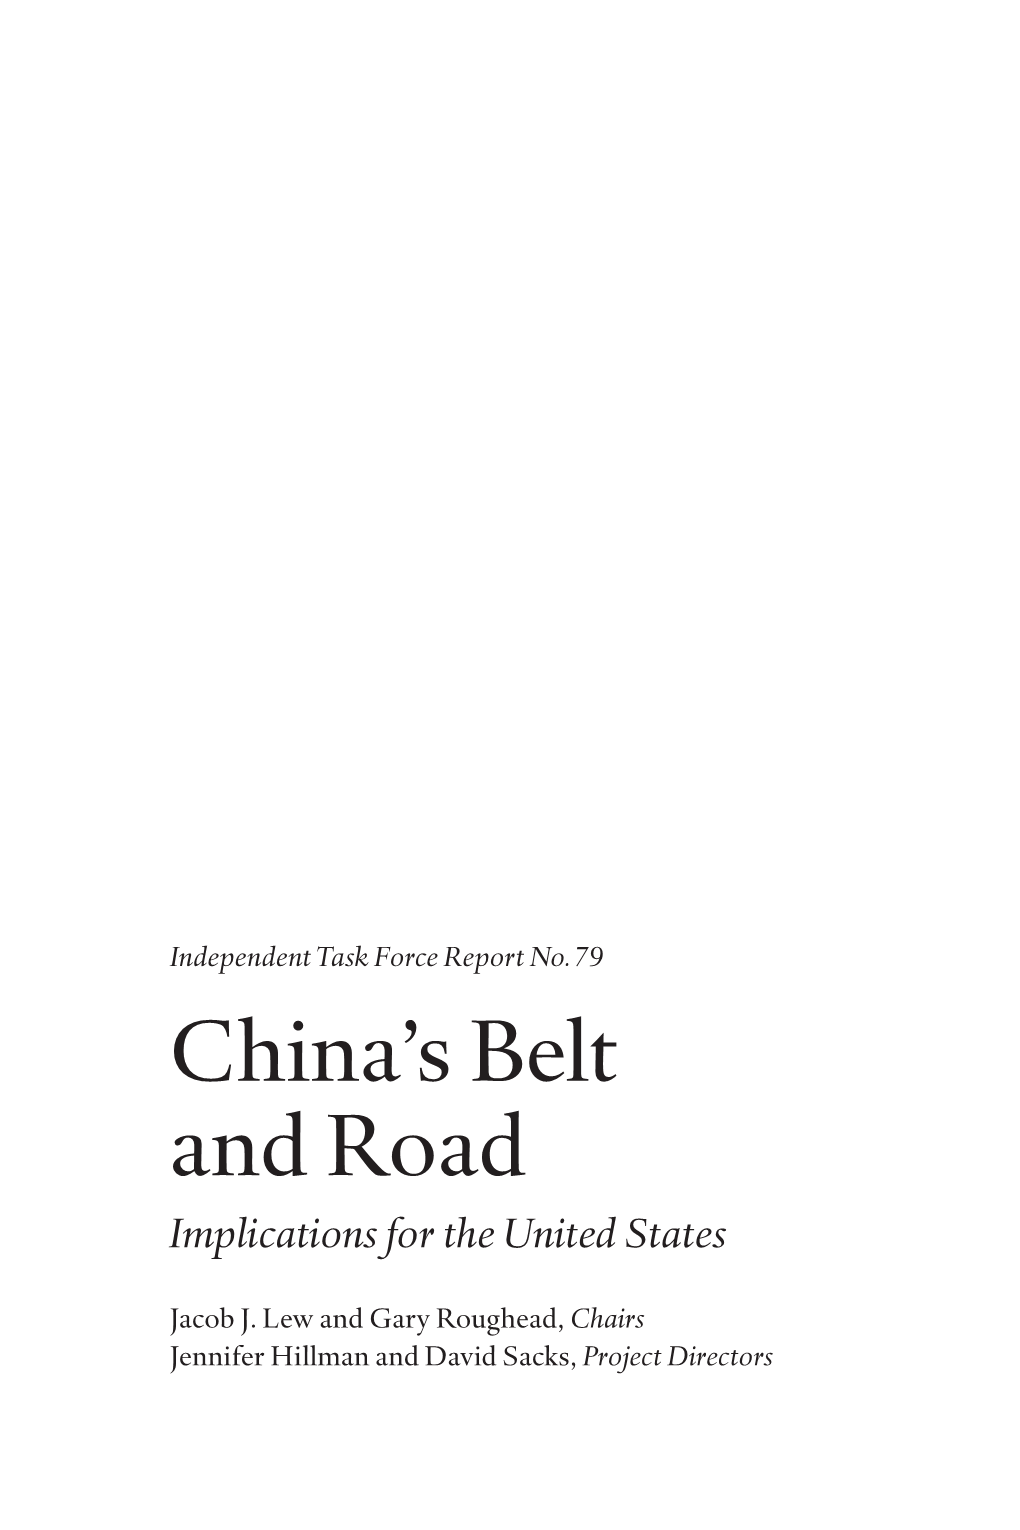 China's Belt and Road